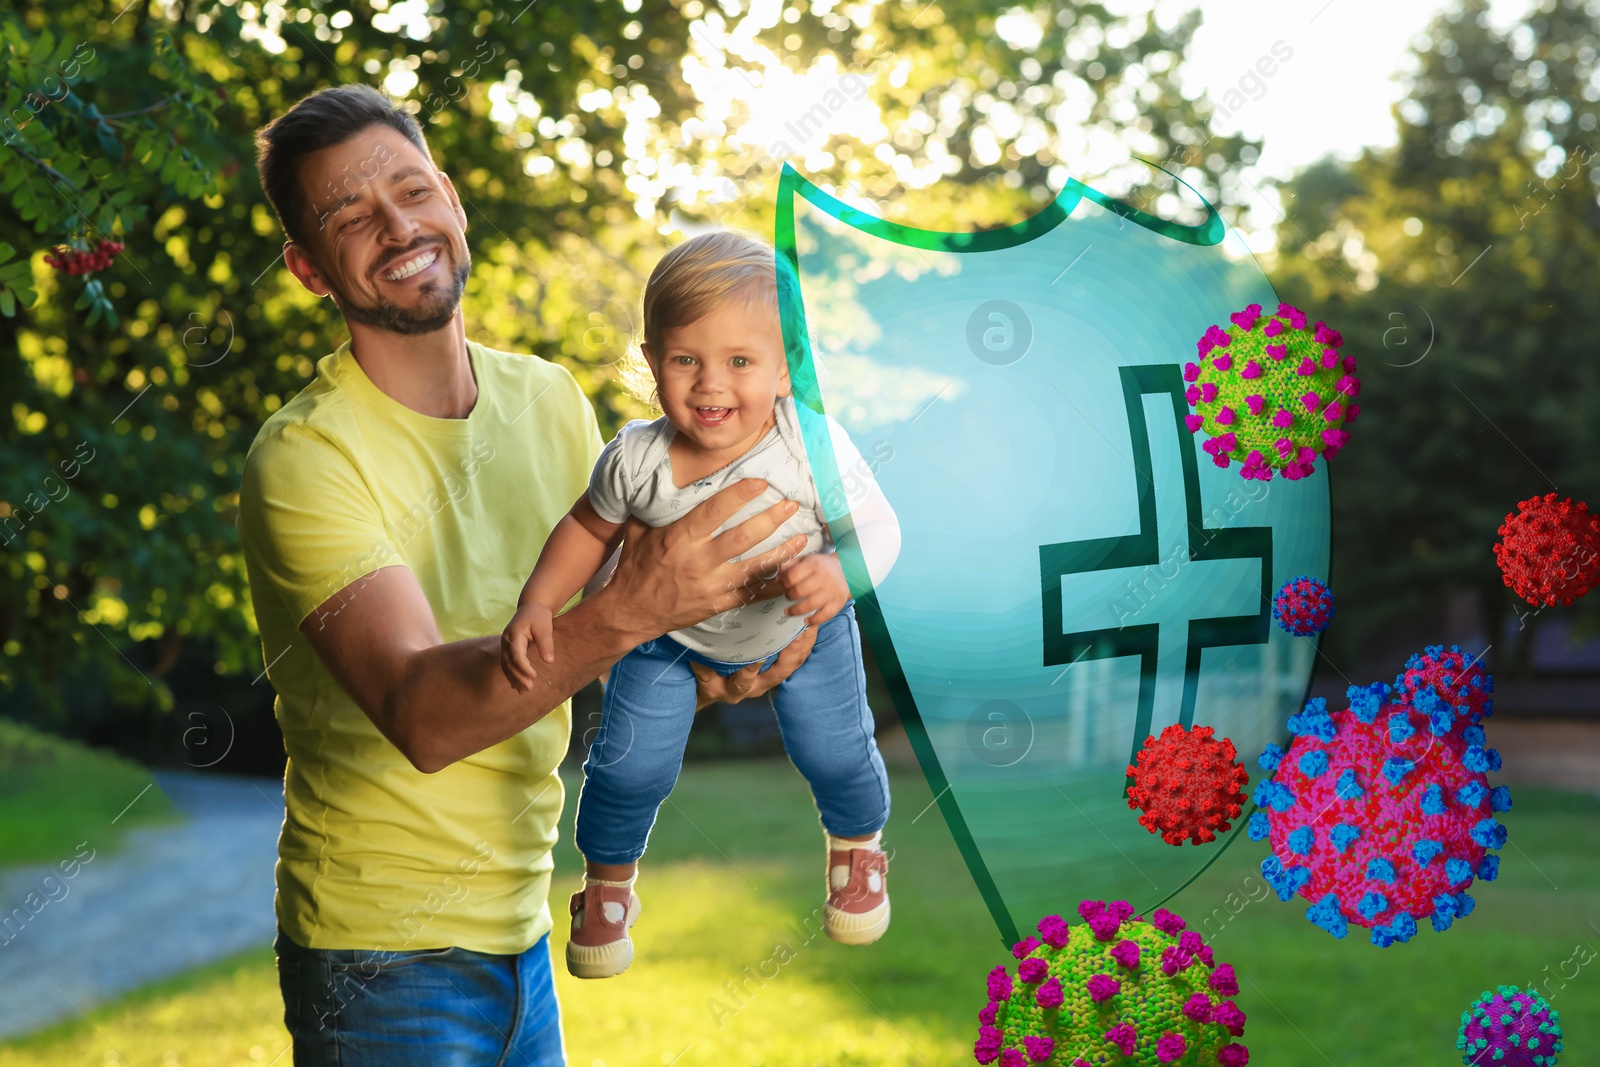 Illustration of Father with his child having fun outdoors. Shield blocking viruses, illustration. Strong immunity concept